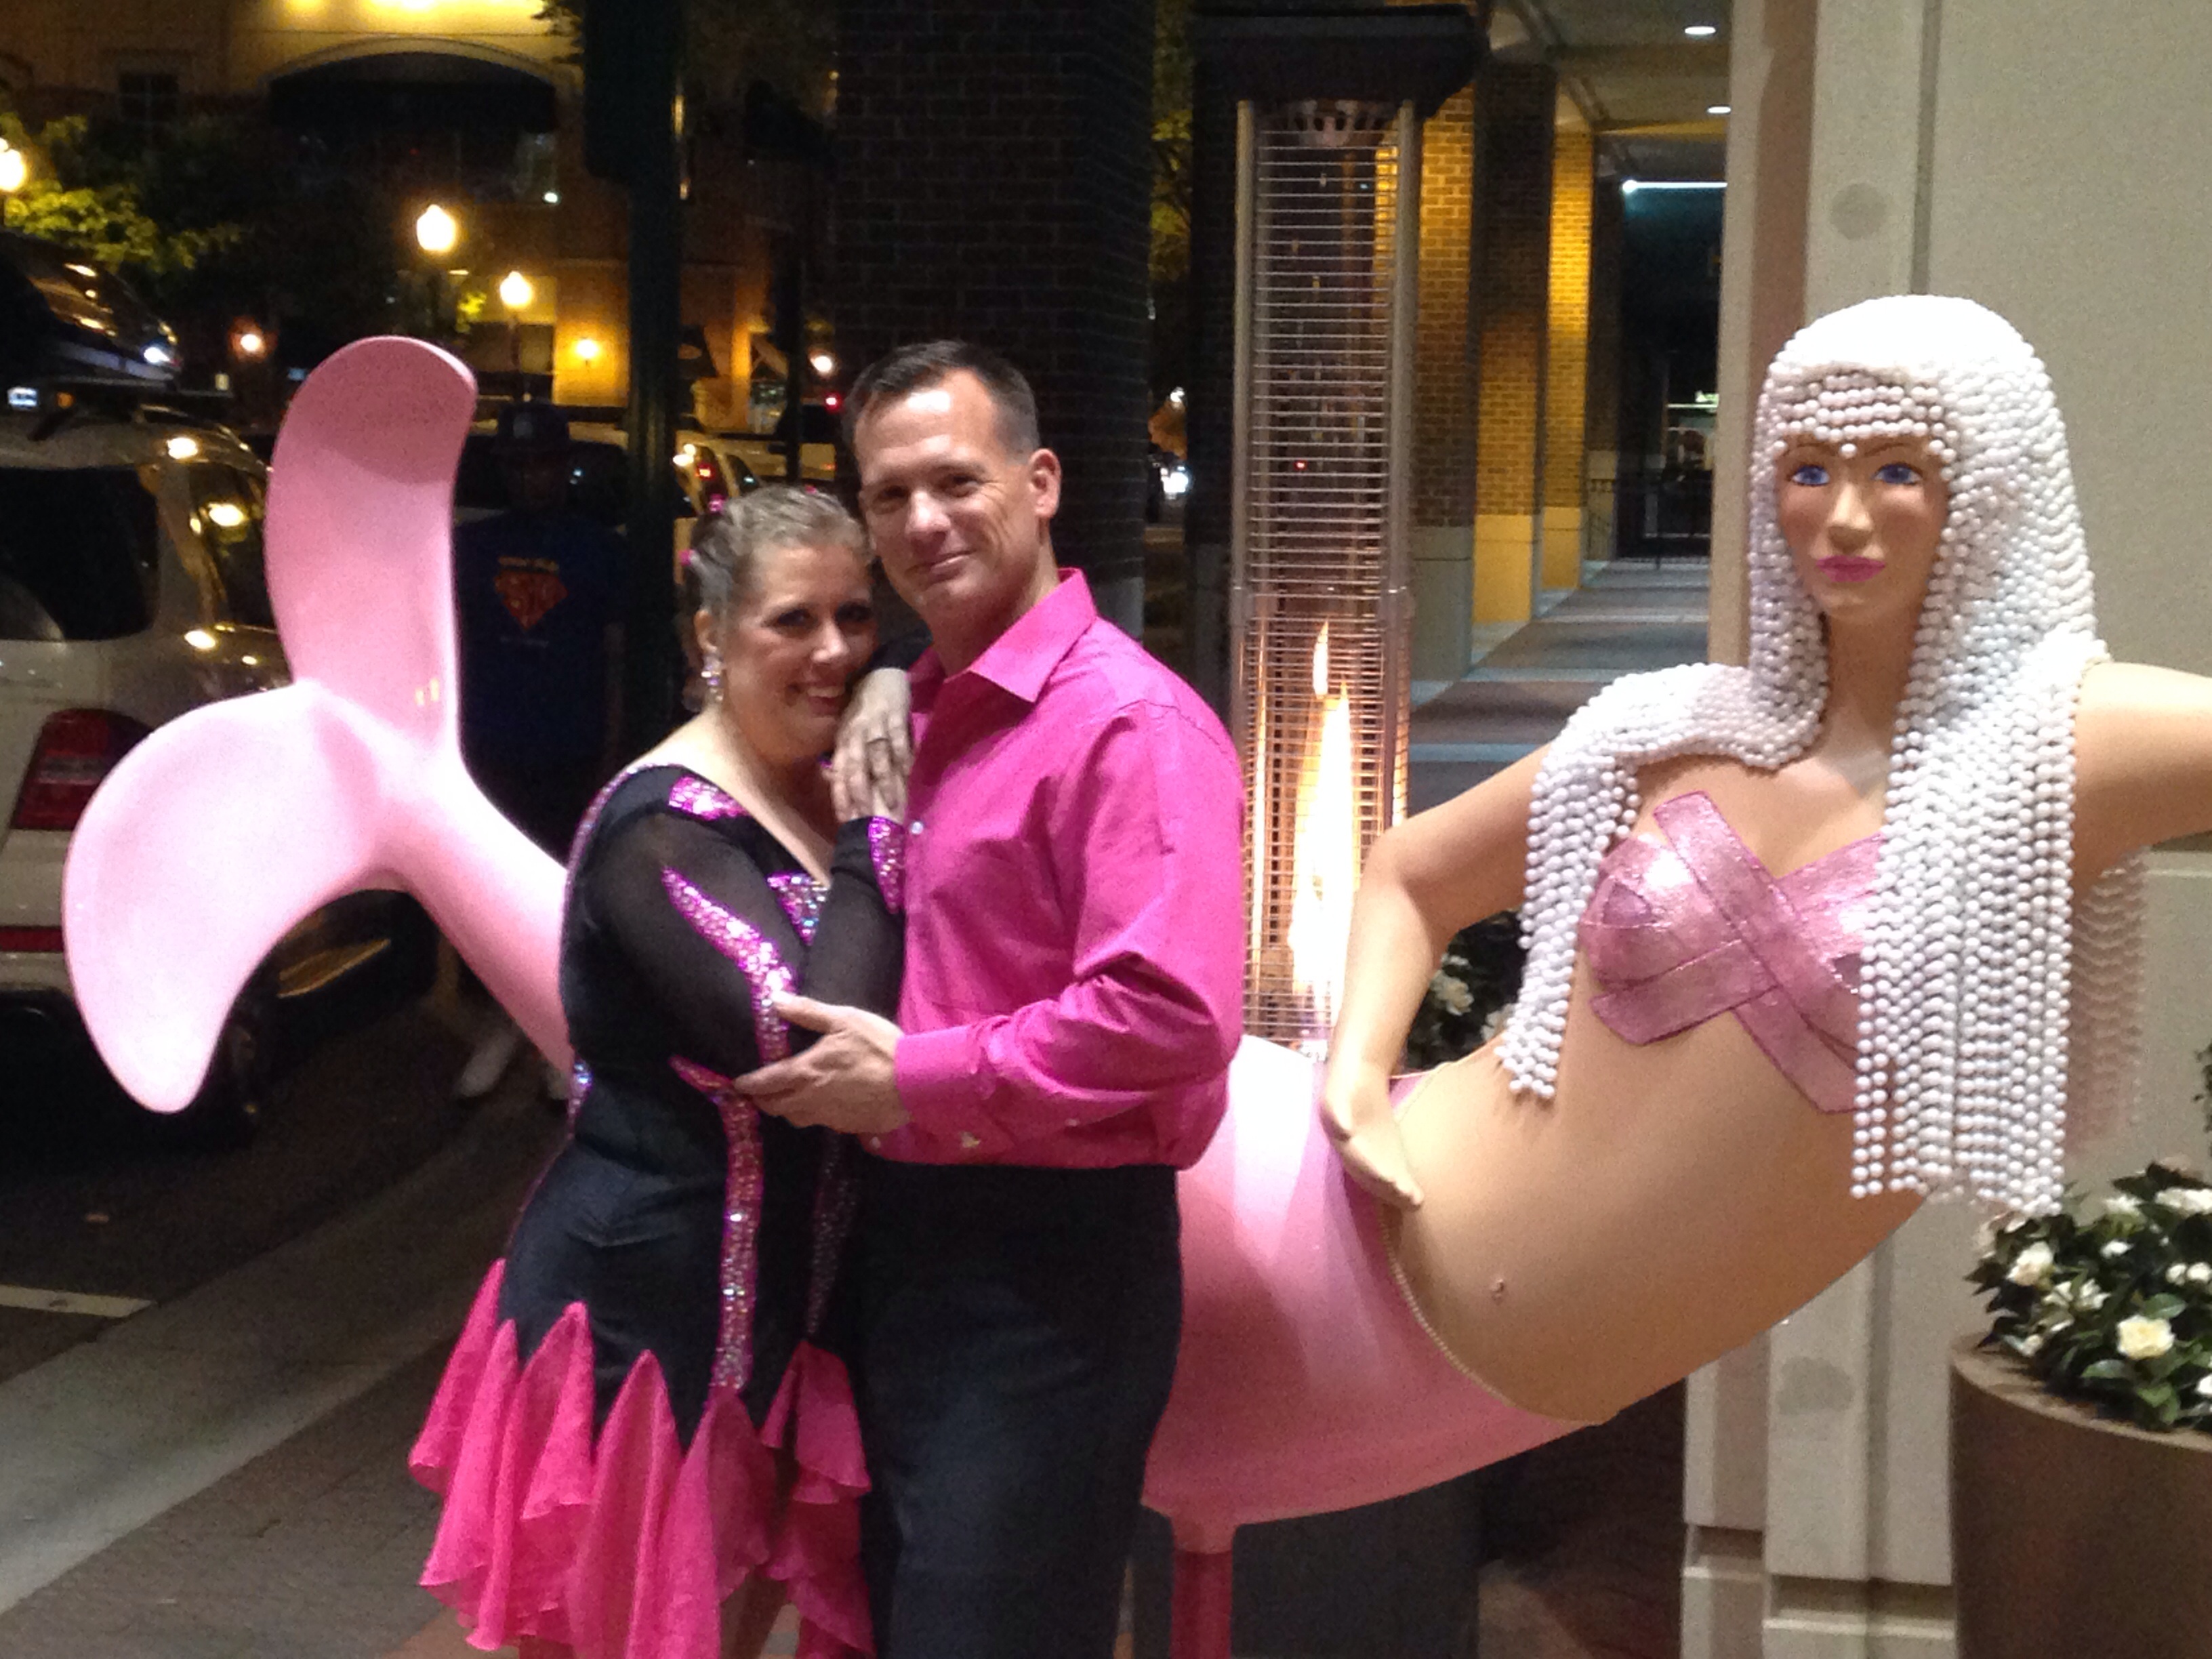 My Professional Dance Instructor, Melinda Spencer, and I after performing exhibition dances at the First Annual Pink-o de Mayo event held by Susan G. Komen Tidewater at the Westin in Town Center Virginia Beach.